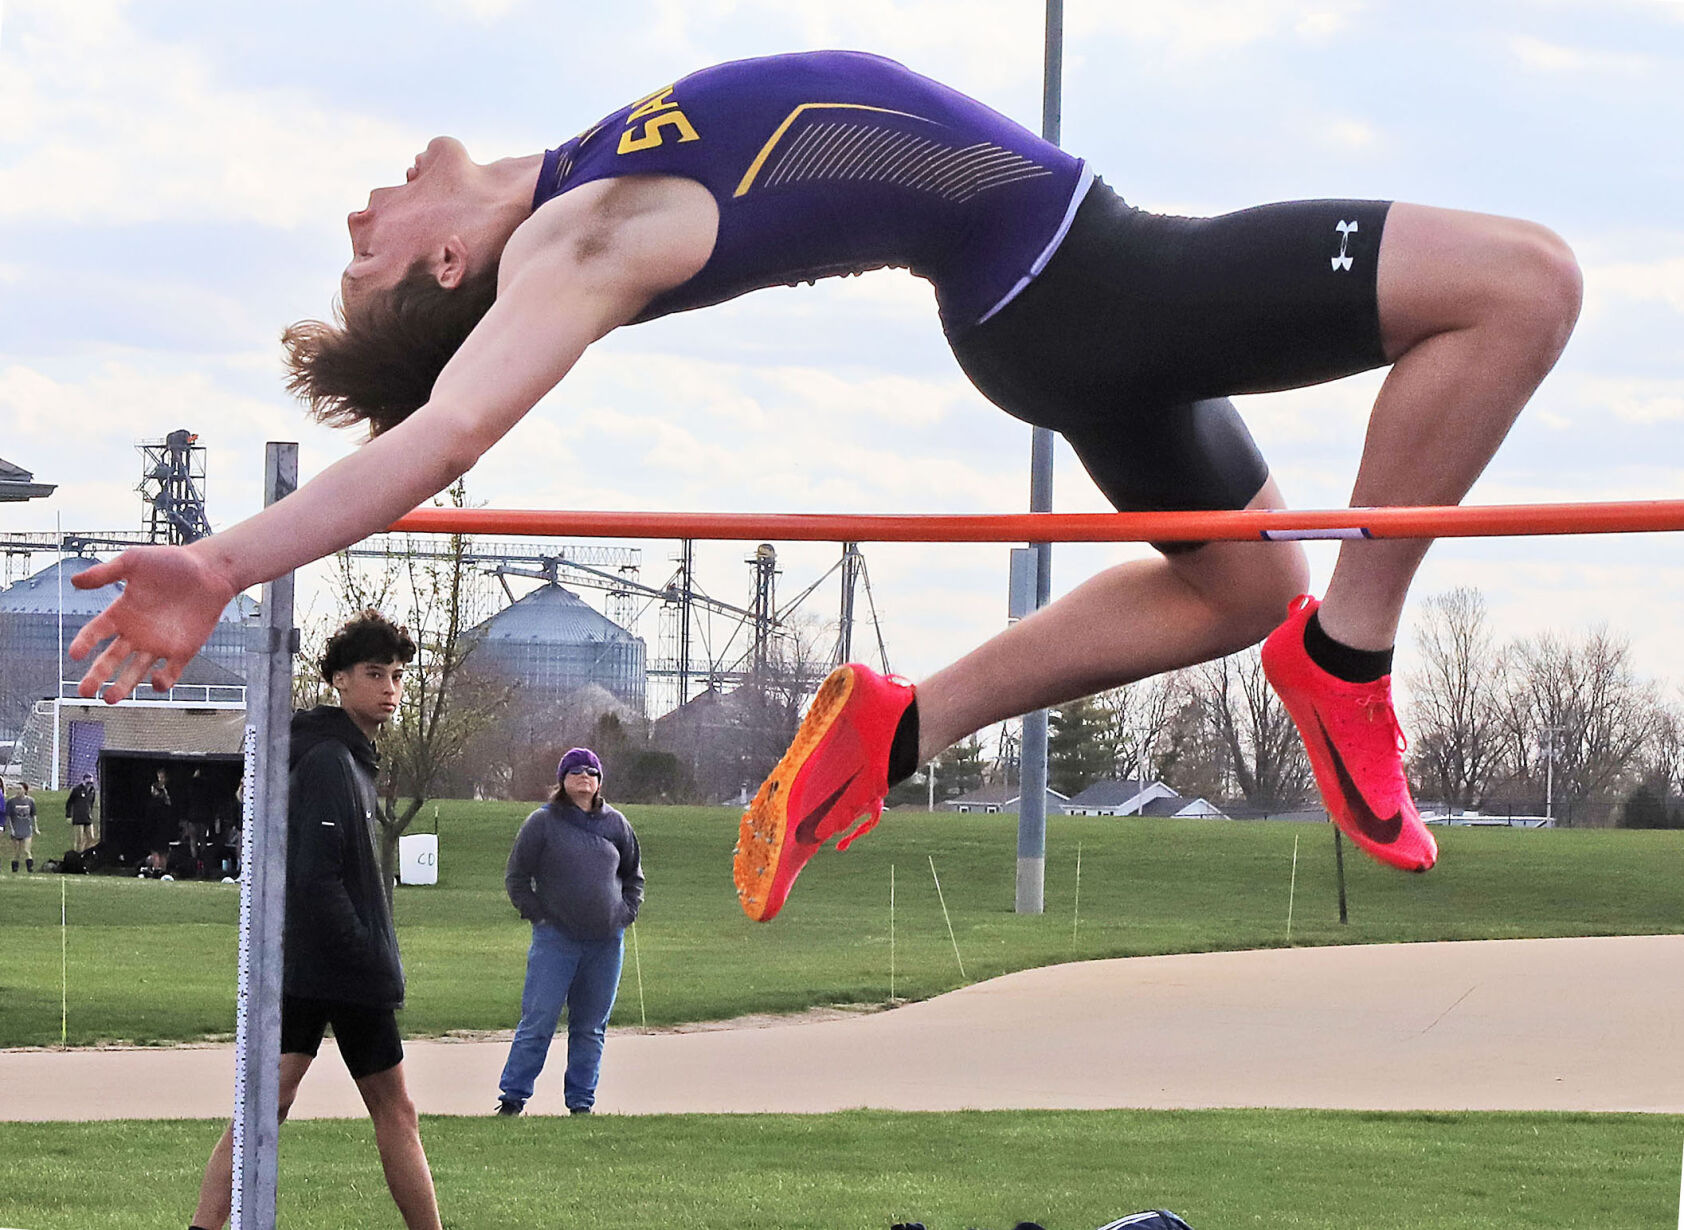 Central DeWitt Dominates Saber Relays, Northeast Excels – Recap of Class A and Class B Results